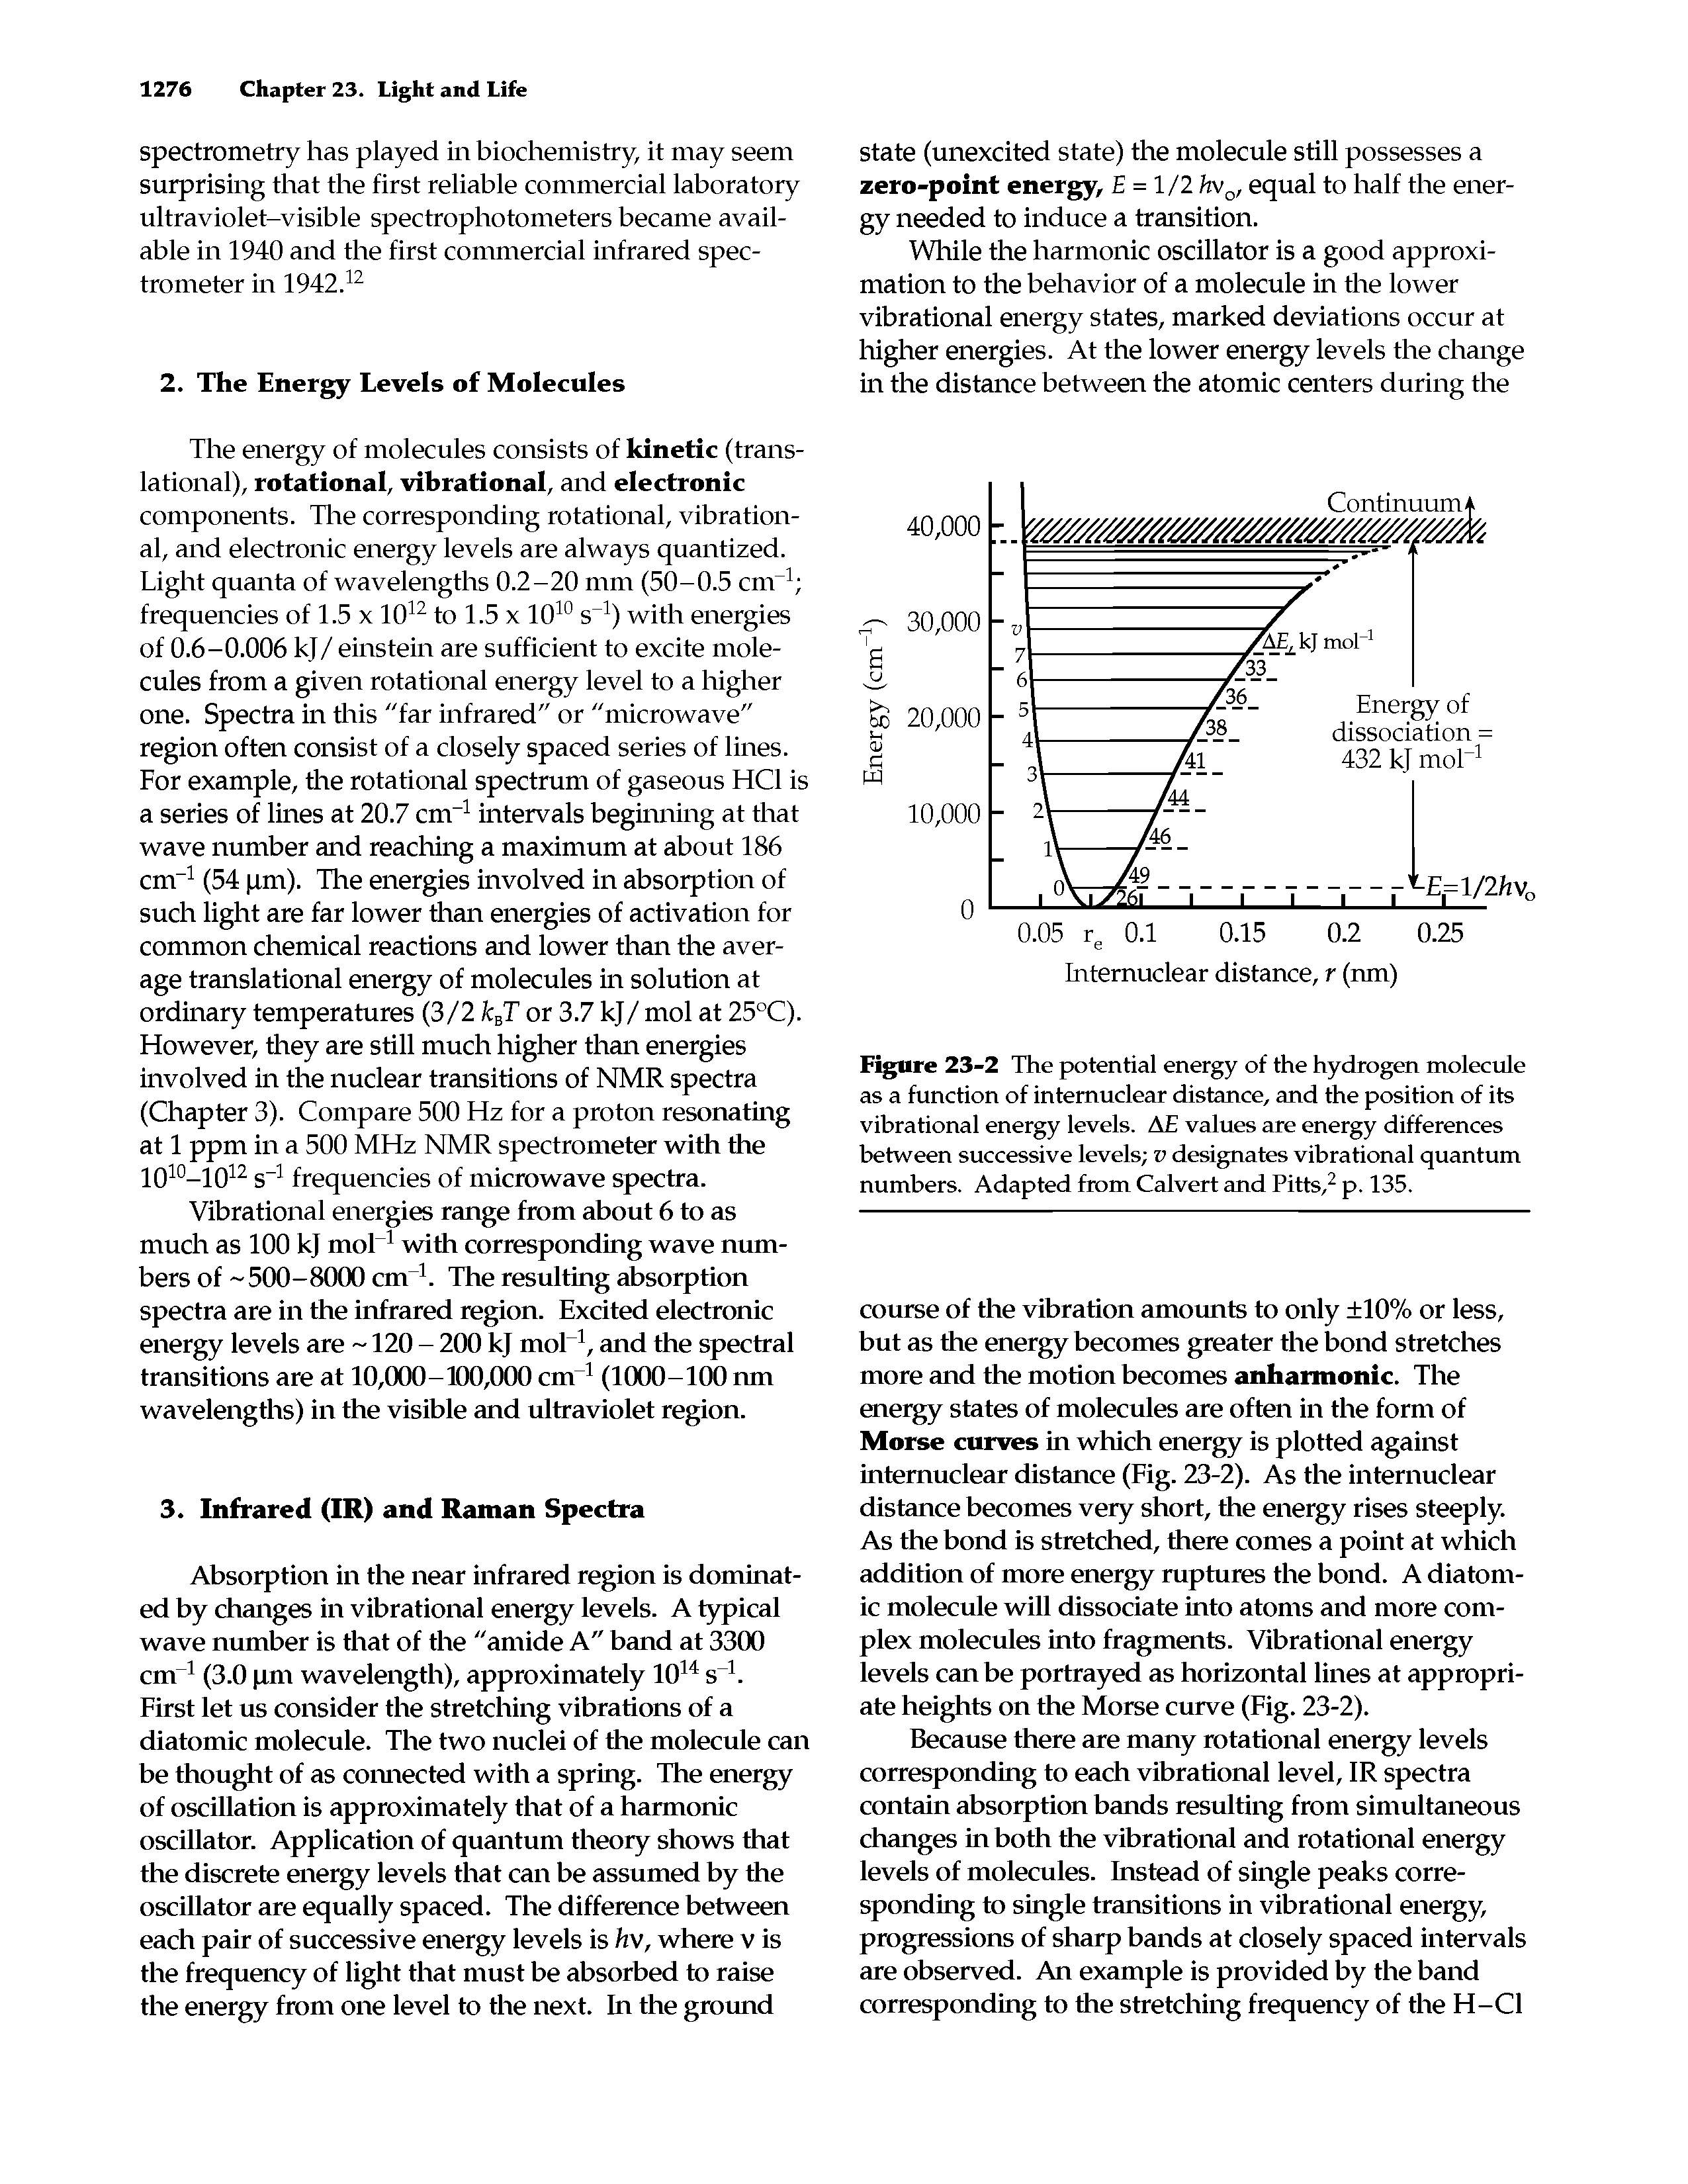 Figure 23-2 The potential energy of the hydrogen molecule as a function of internuclear distance, and the position of its vibrational energy levels. AE values are energy differences between successive levels v designates vibrational quantum numbers. Adapted from Calvert and Pitts,2 p. 135.